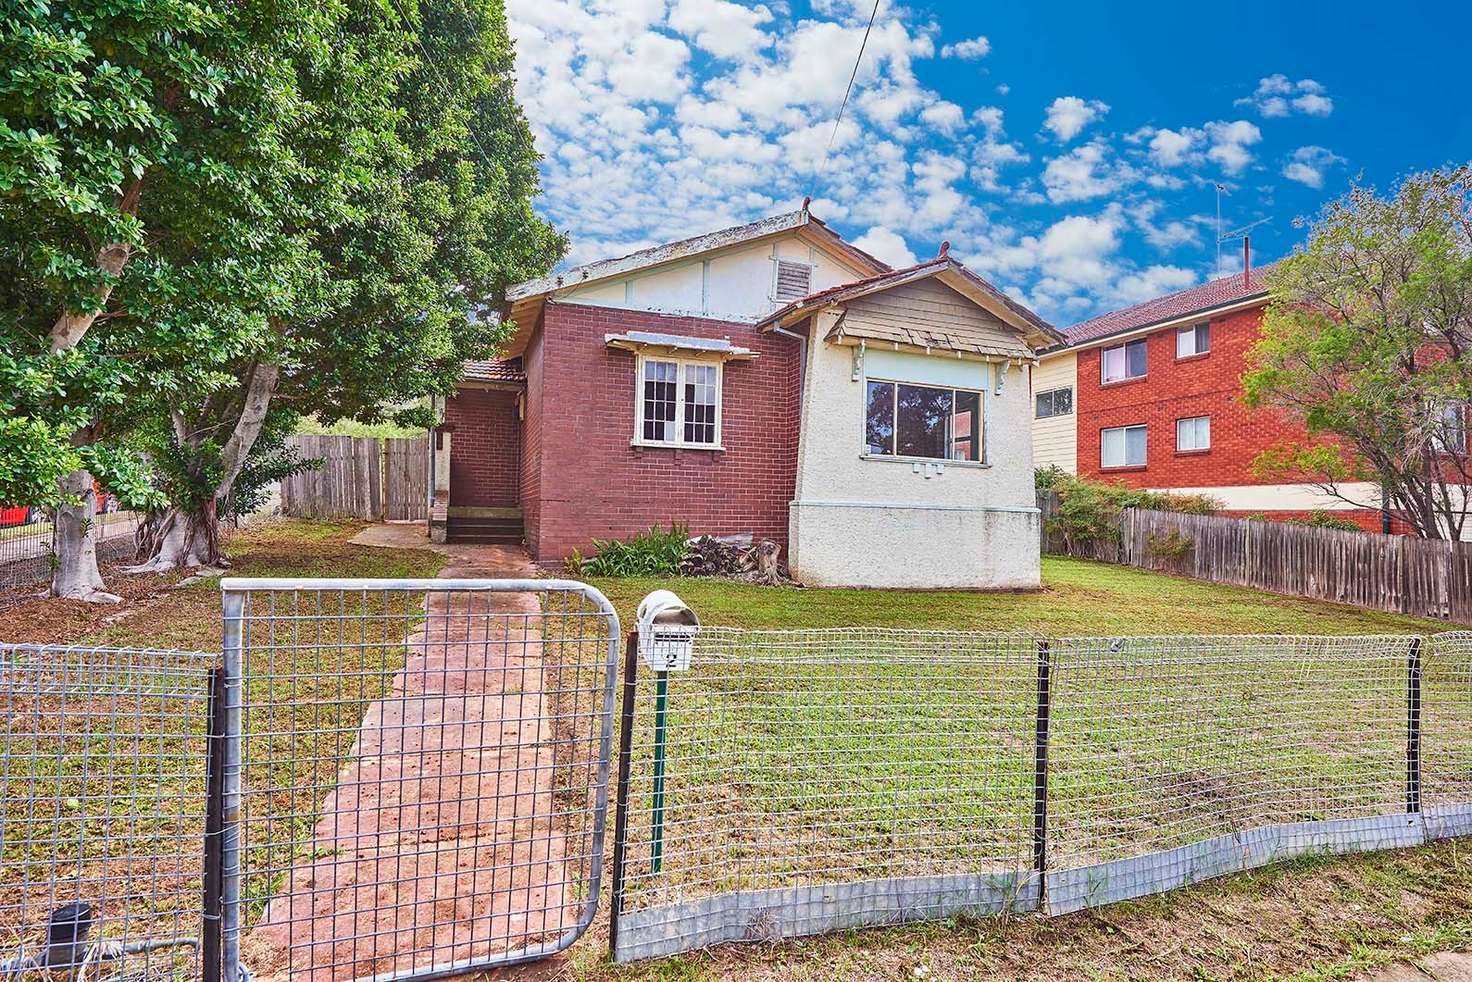 Main view of Homely house listing, 2 Oreilly st, Parramatta NSW 2150